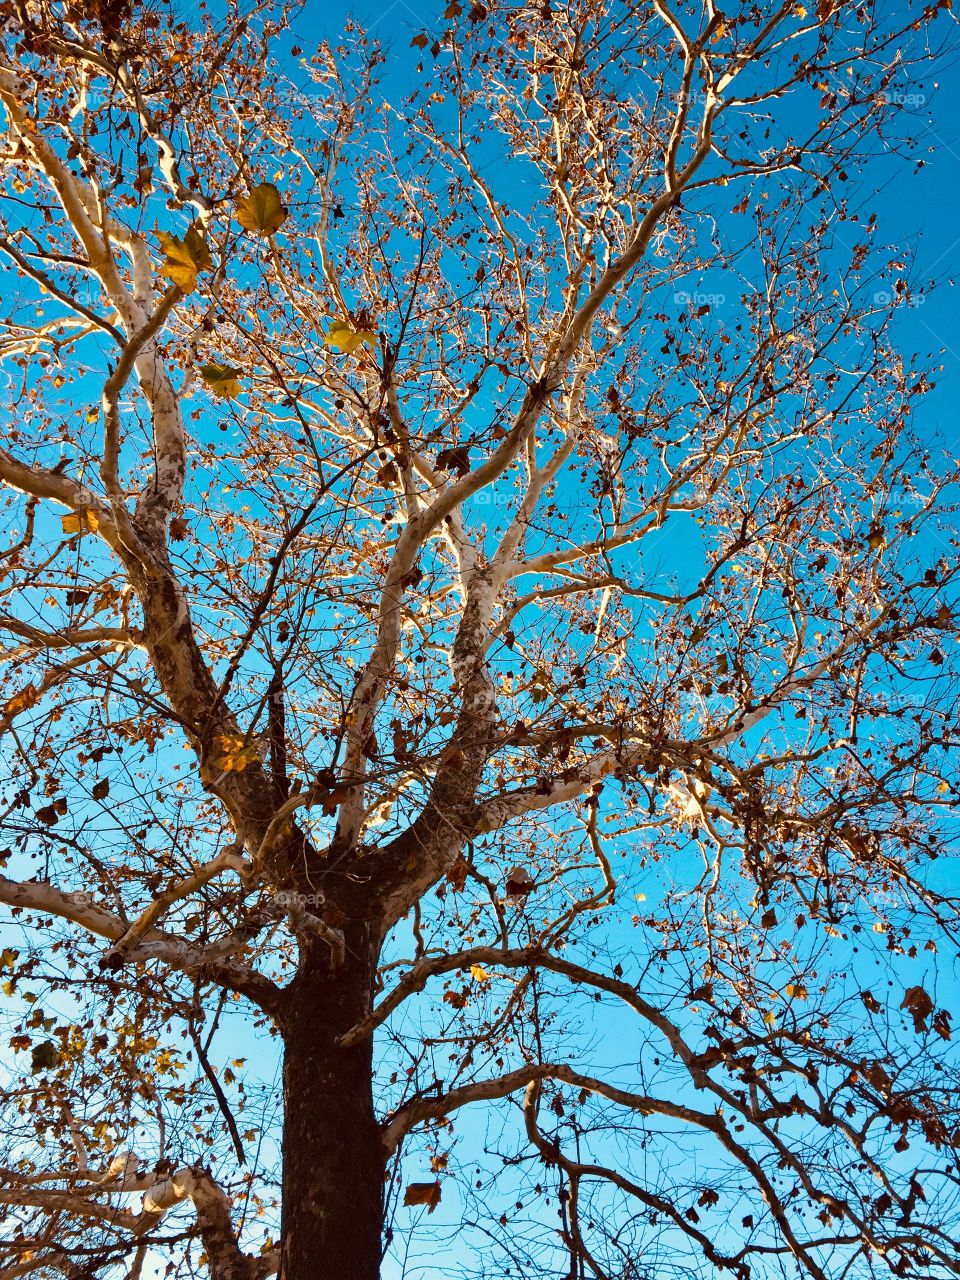 The highest branches of a giant Sycamore tree, illuminated by cold sunlight against a clear blue sky in autumn